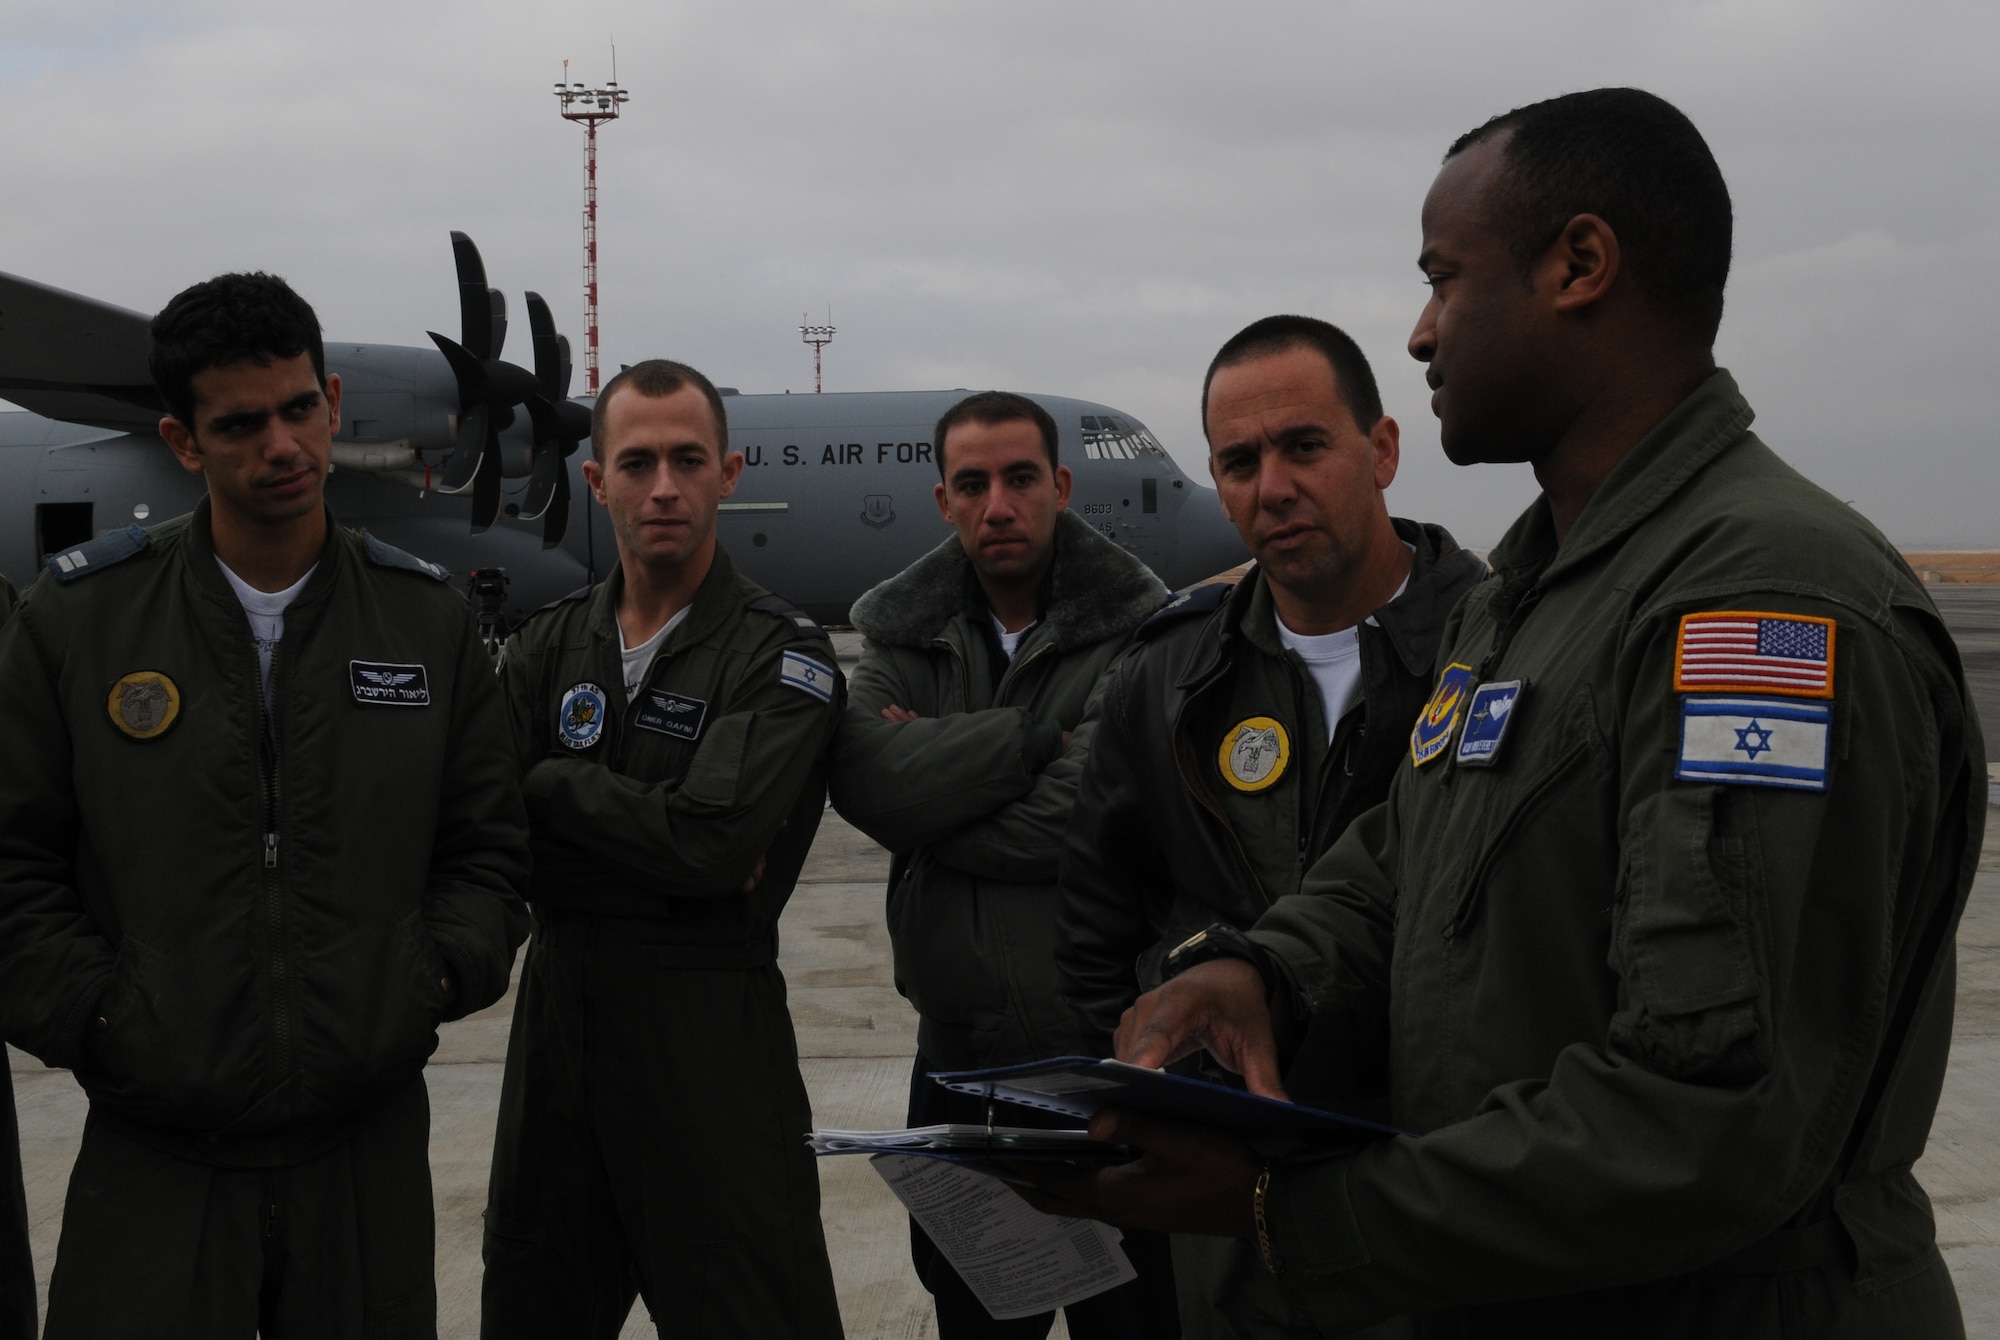 U.S. Air Force Master Sgt. Greg Everett, 37th Airlift Squadron loadmaster, briefs the Israeli Air Force loadmaster on the new C-130J Super Hercules aircraft, Dec. 9, 2009, Nevatim Air Force Base, Israel. The Israeli Army had observers on every flight during the 10-day training exercise for Ramstein Air Base. The Israelis were eager to host Ramstein units to learn more about the C-130J models they will be getting in the next couple of years. (U.S. Air Force photo by Airman 1st Class Alexandria Mosness)